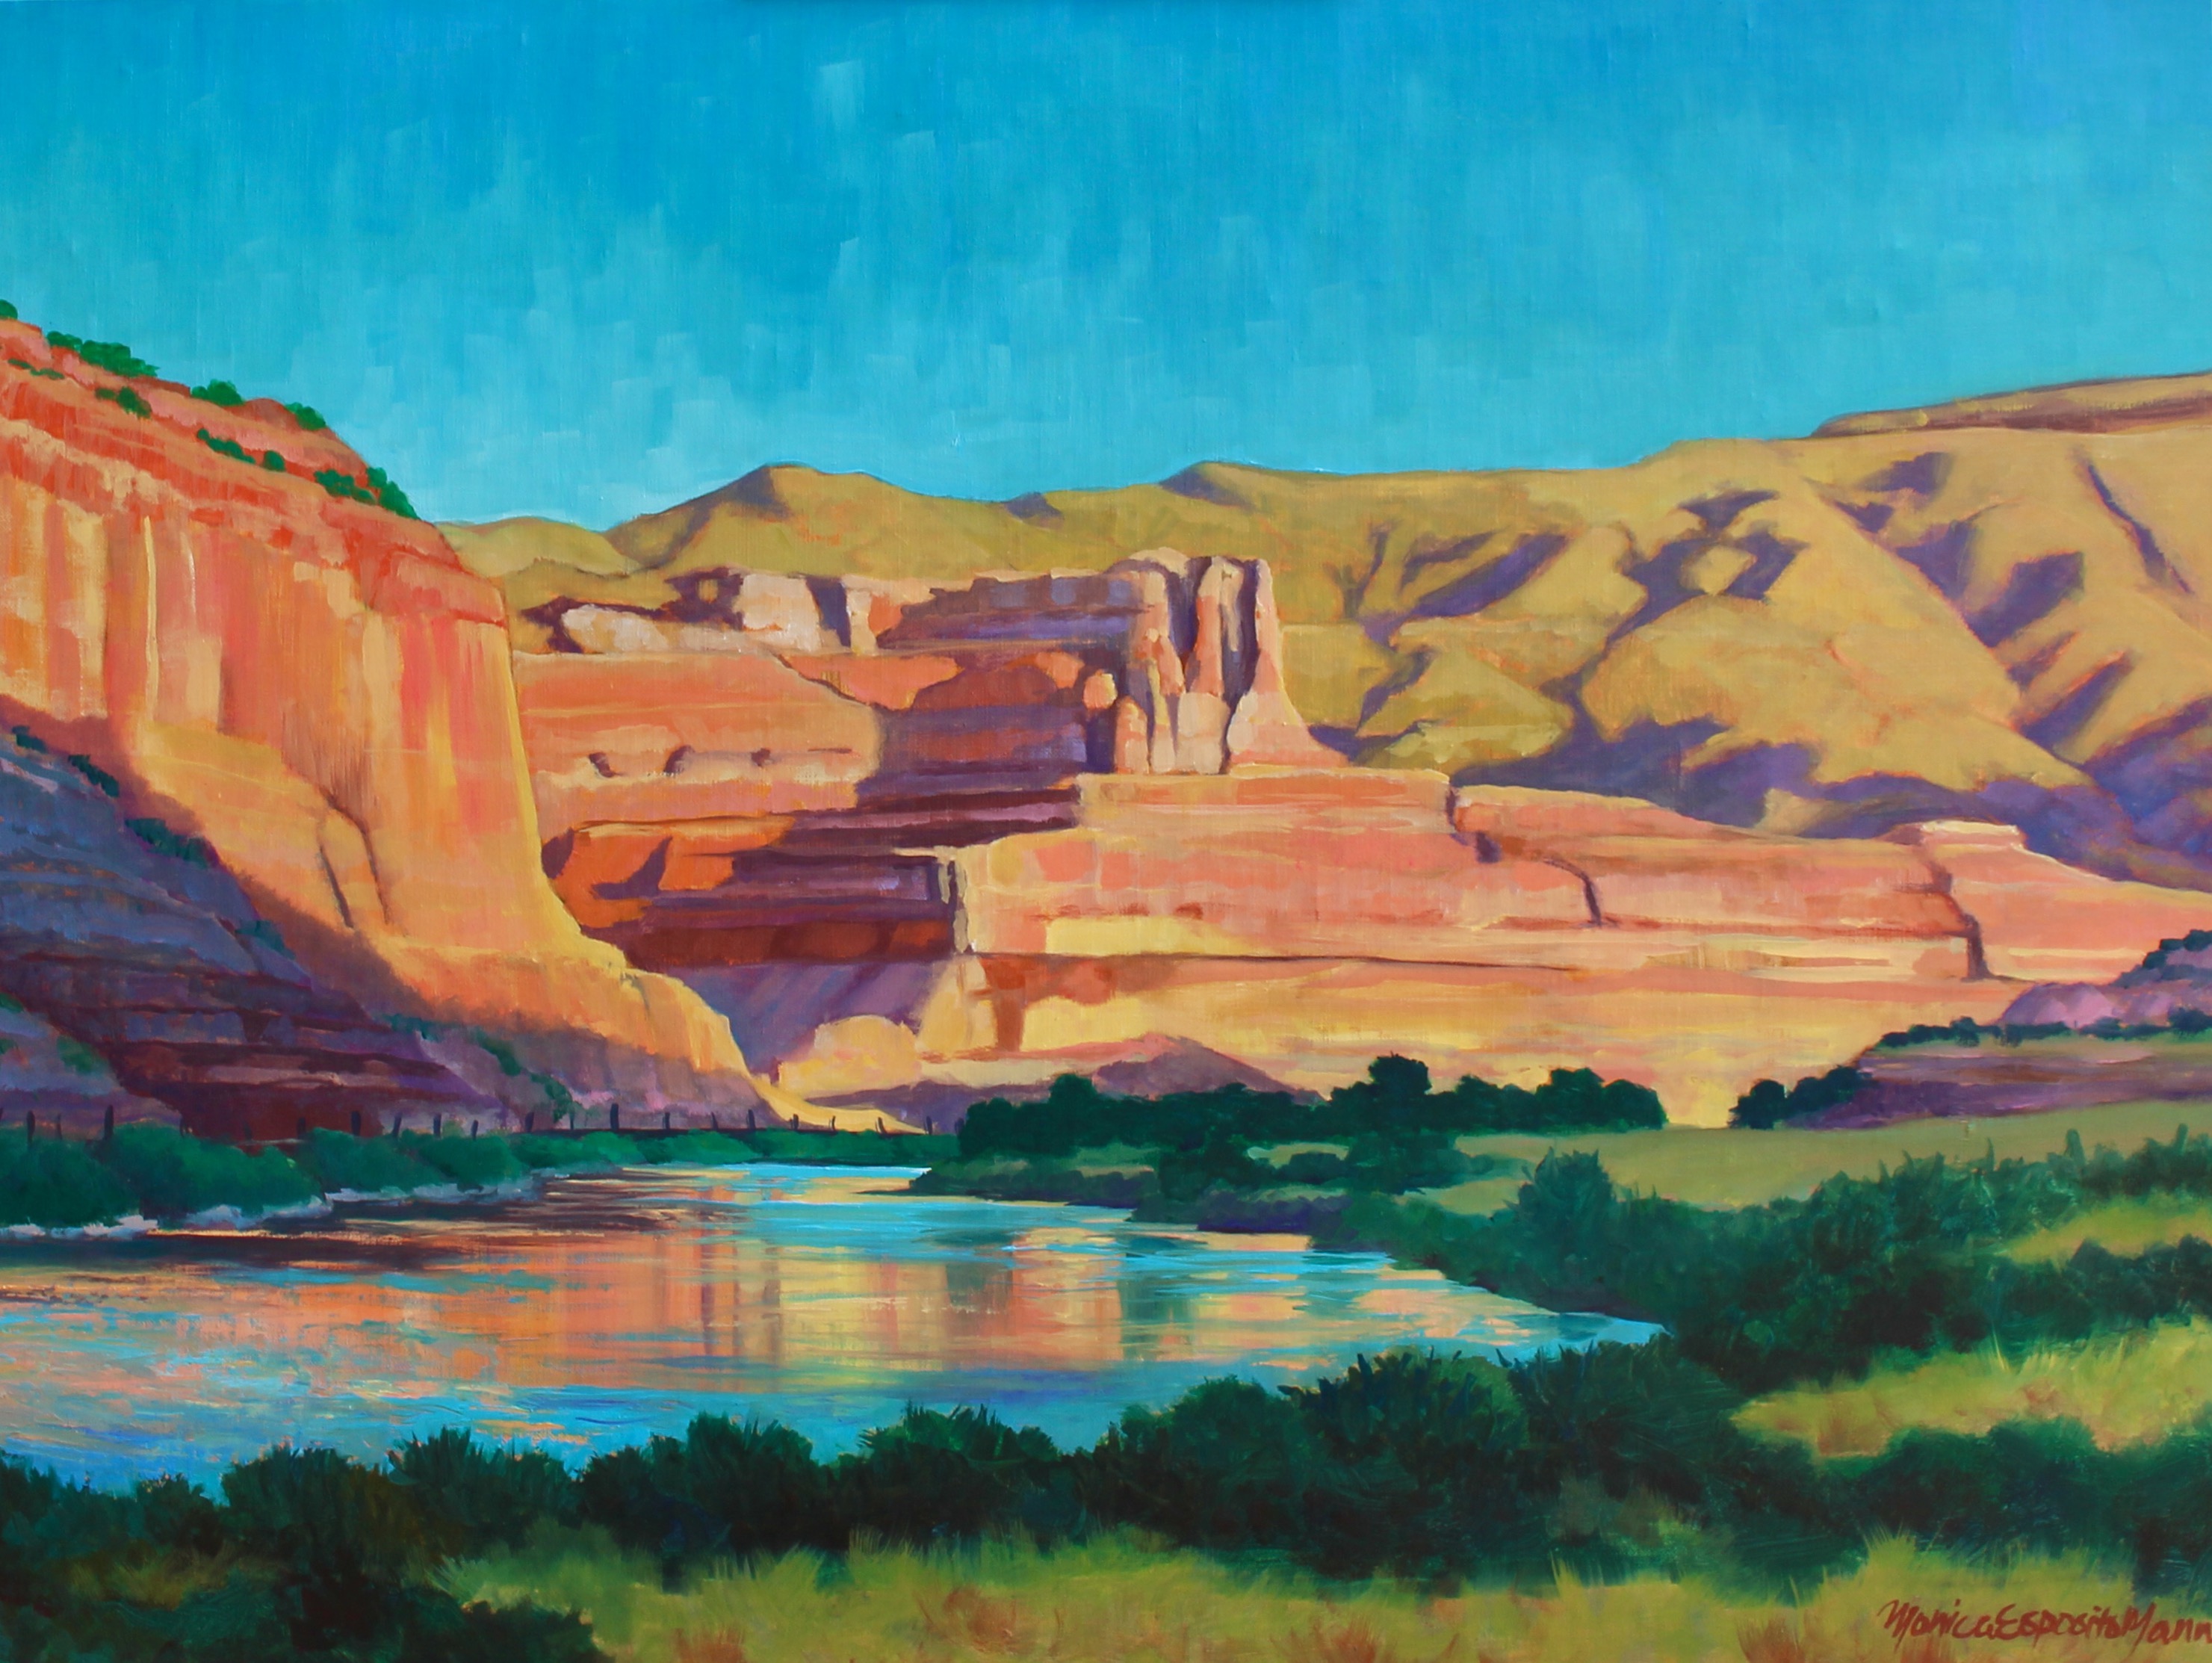 "Up River from Mee Canyon" by Monica Esposito Mann